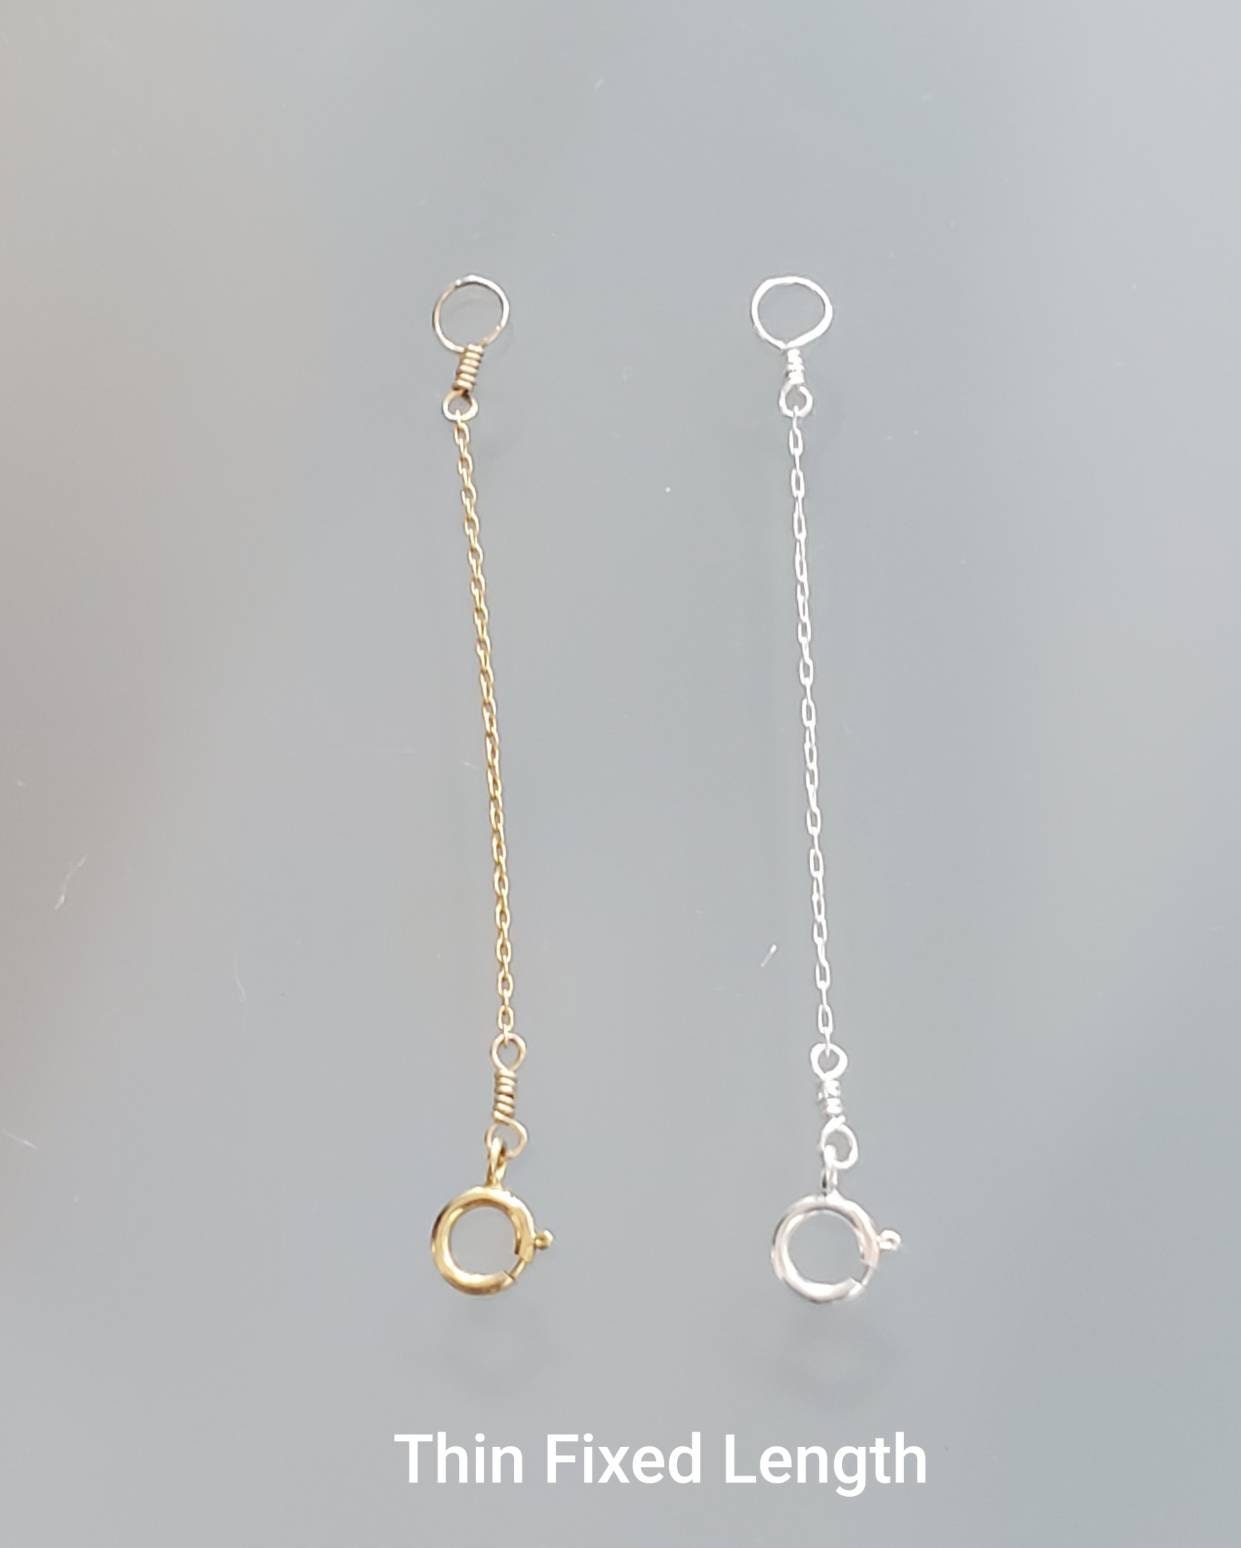 Necklace Extender, Sterling Silver, Gold Filled, Extension, Multi Length,  Or, Adjustable, or Fixed, Use on Any Necklace!